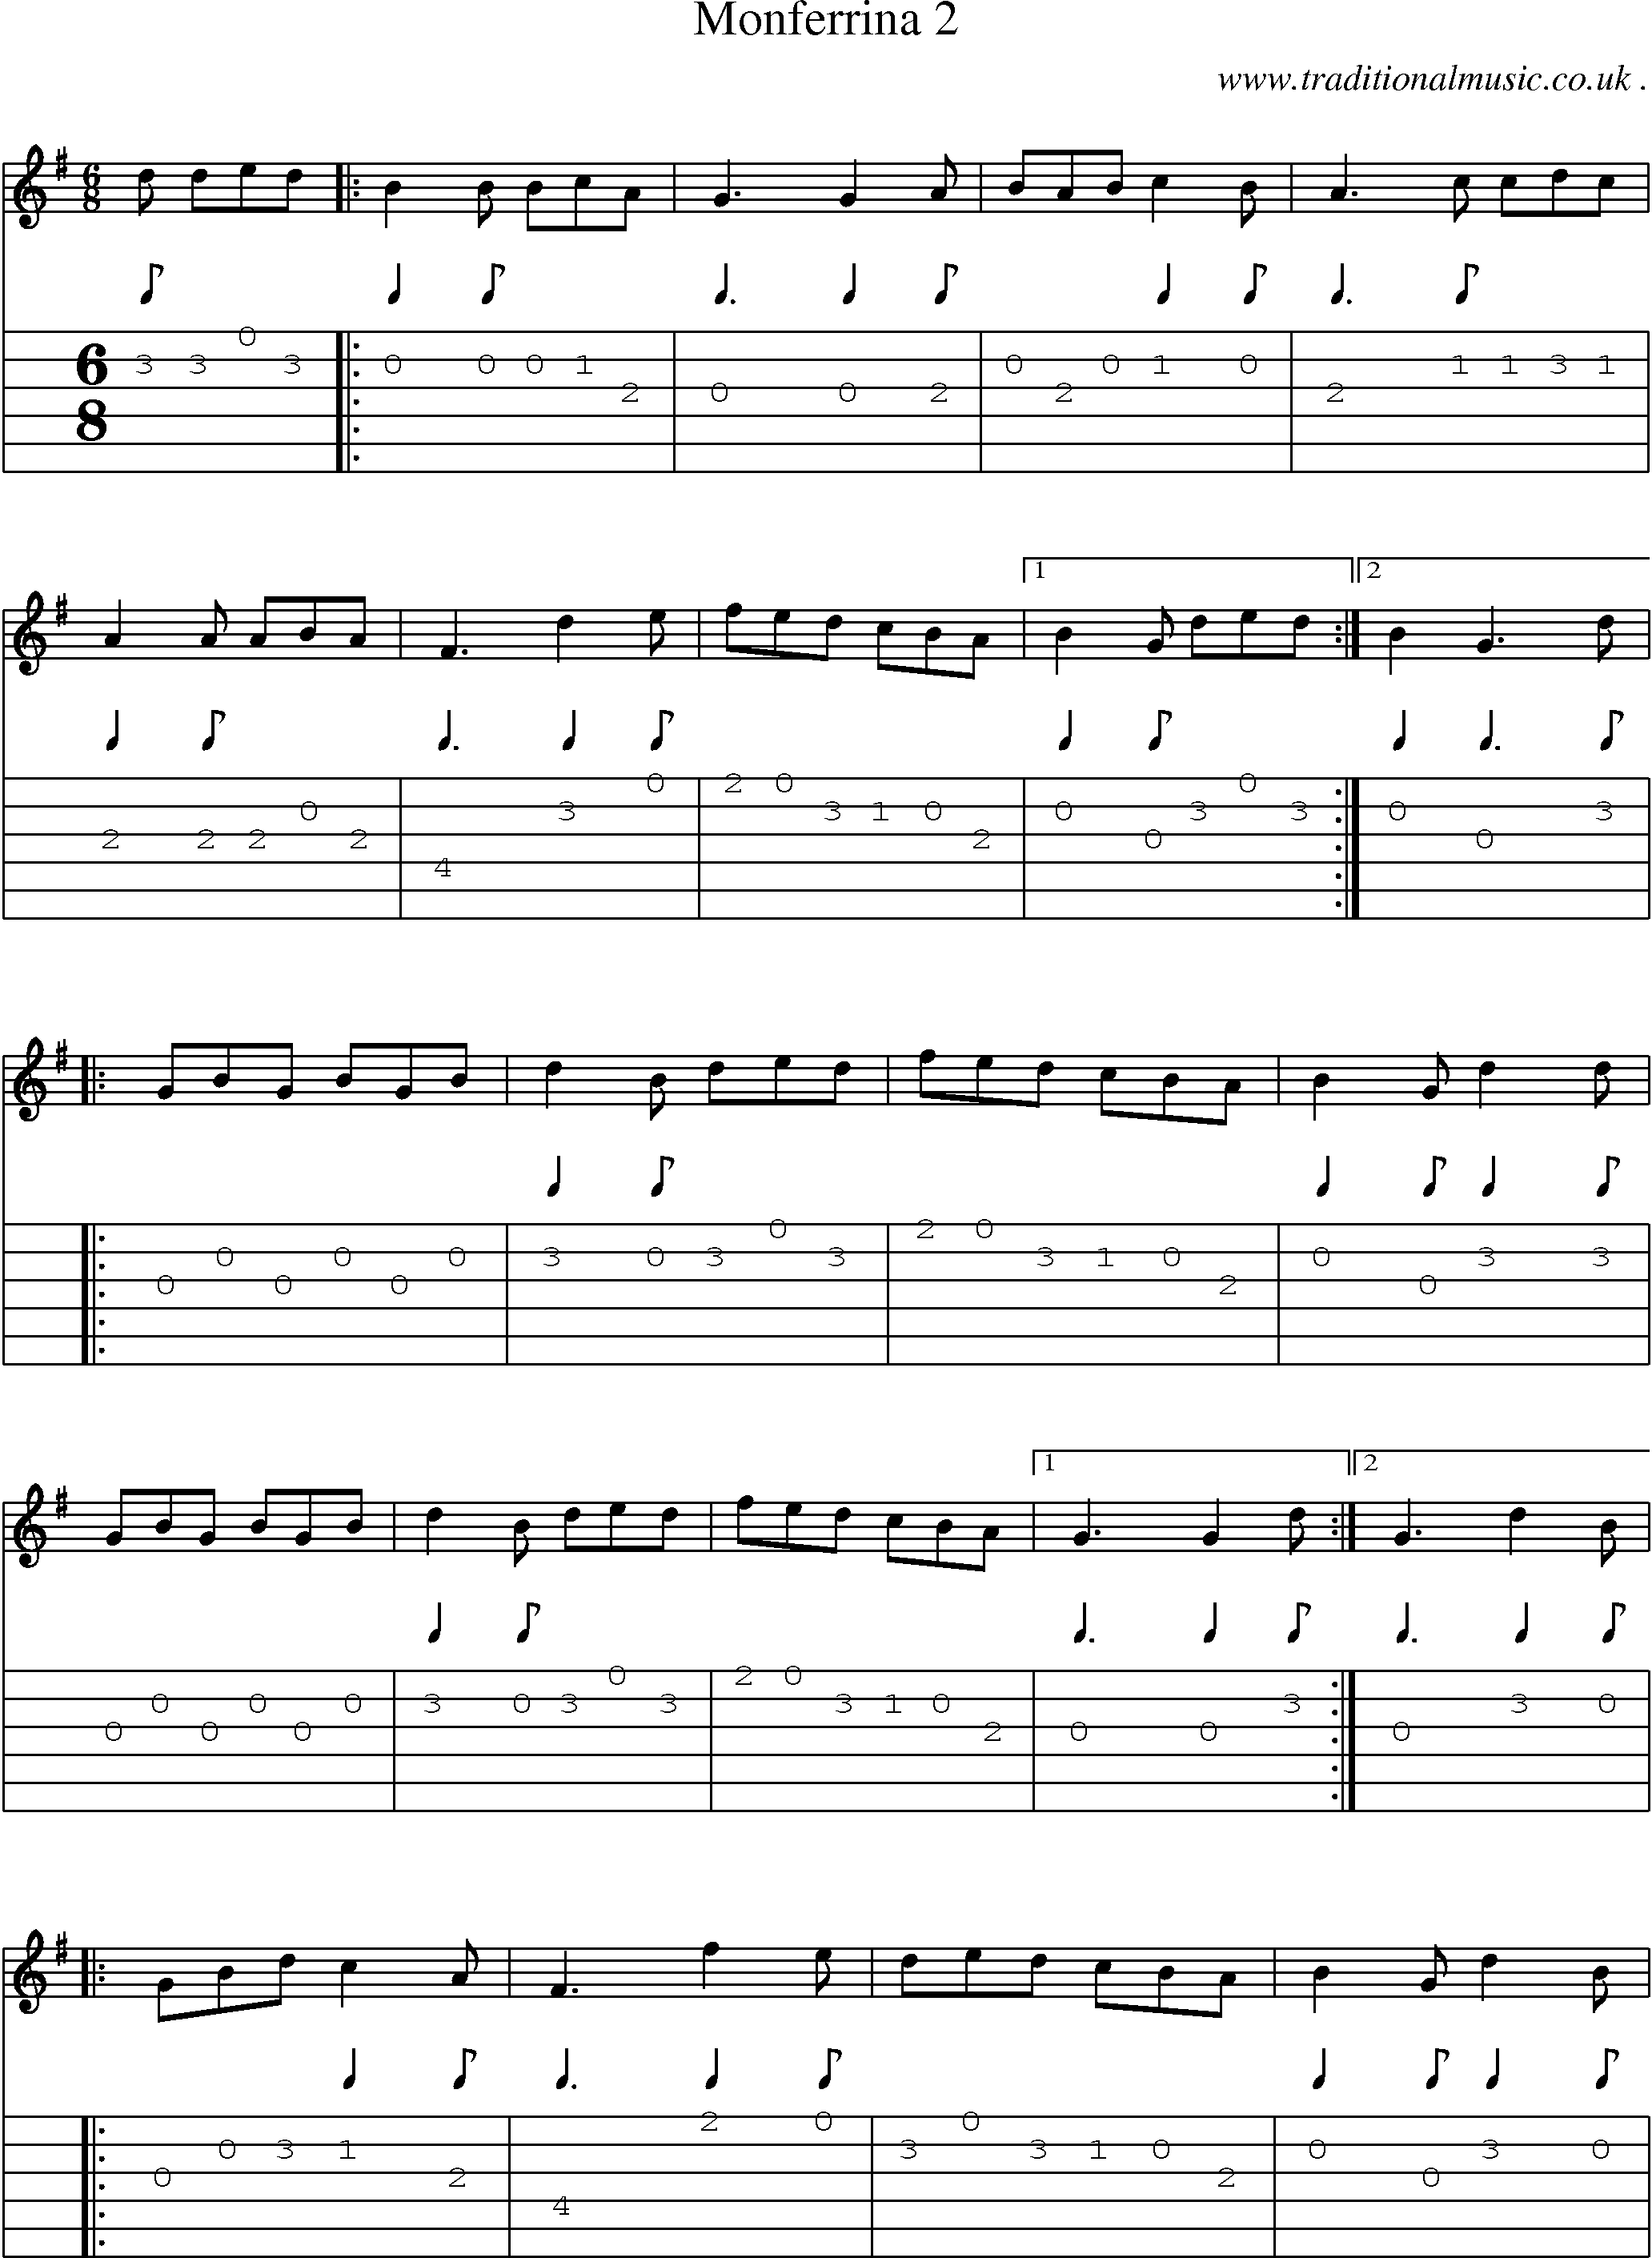 Sheet-Music and Guitar Tabs for Monferrina 2